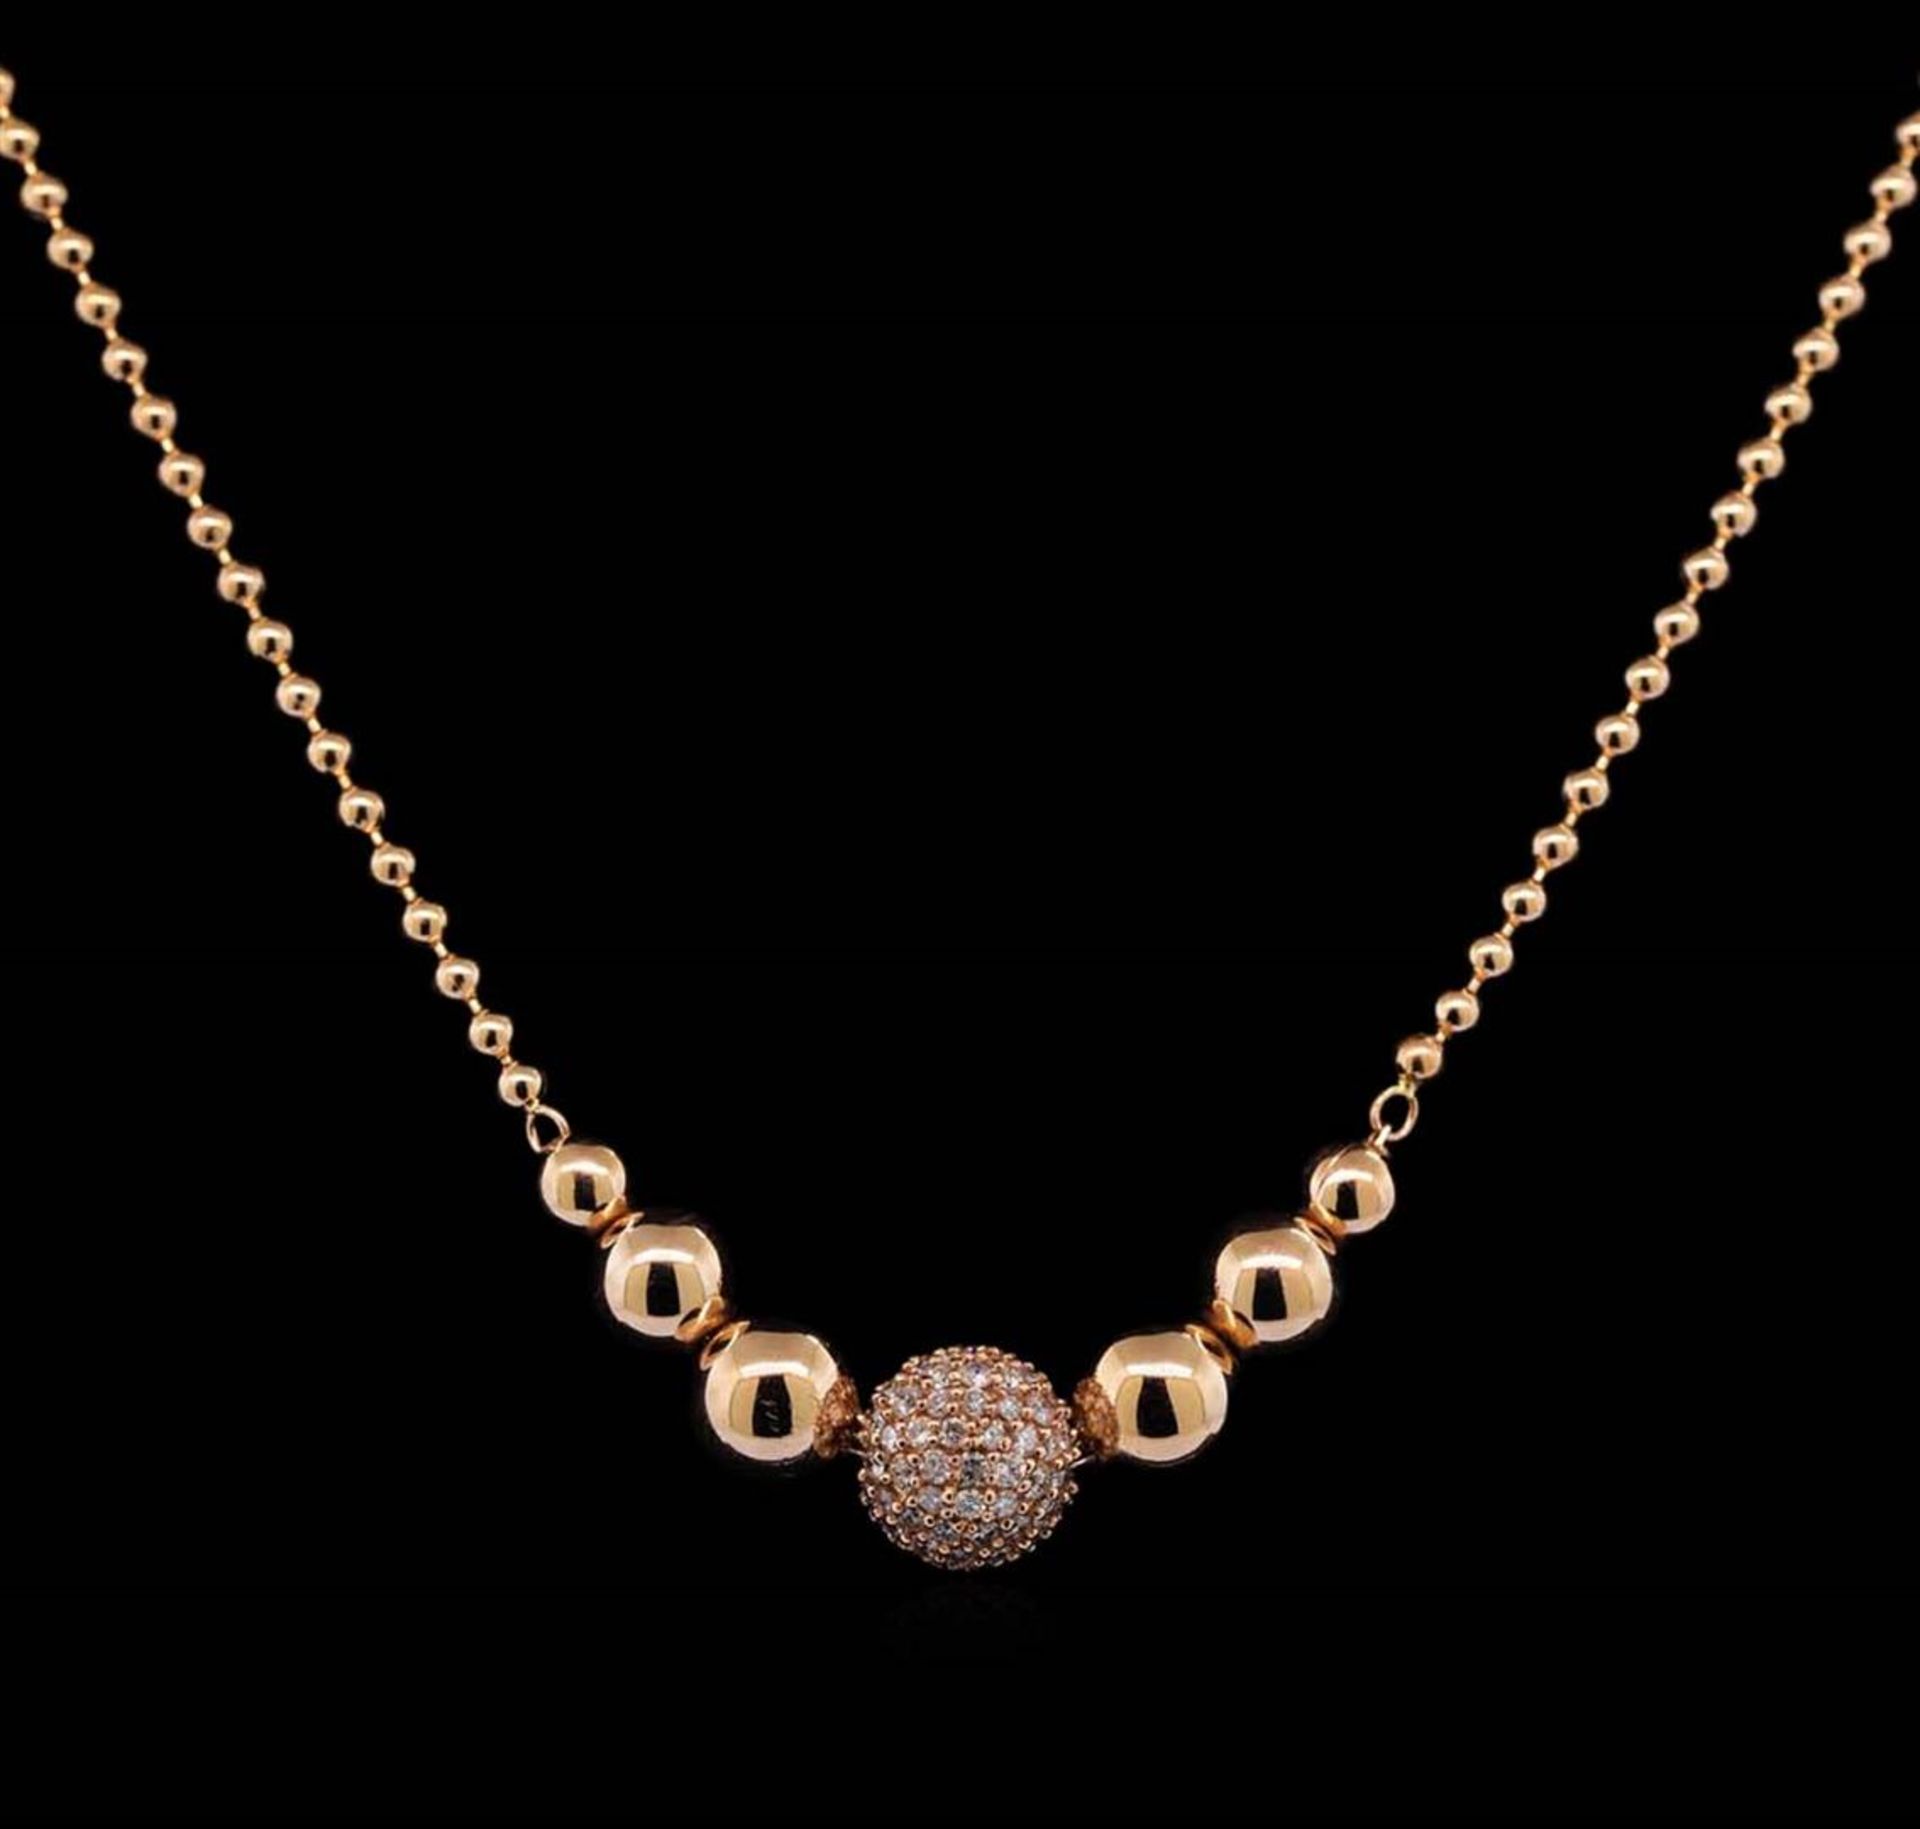 1.40 ctw Diamond Necklace - 14KT Rose Gold - Image 2 of 3